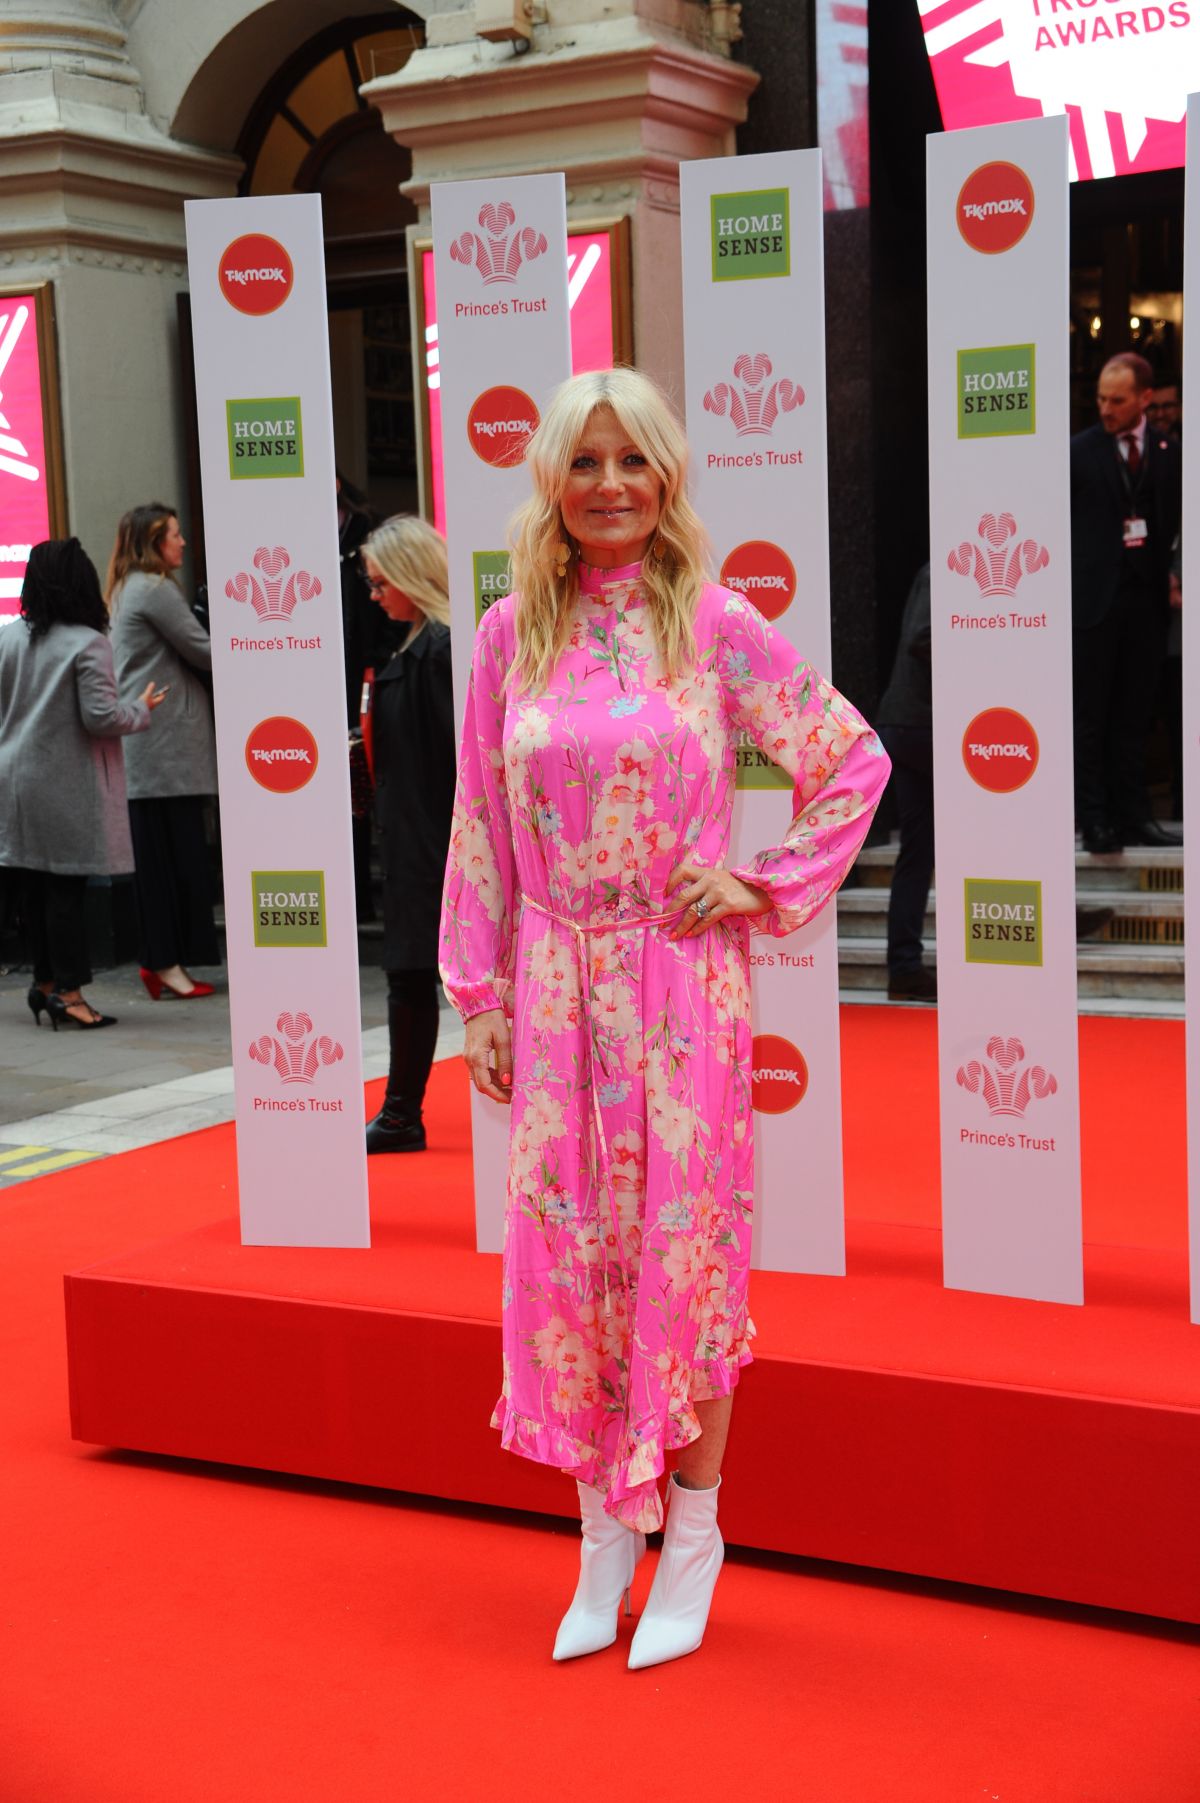 GABY ROSLIN at The Prince’s Trust, Tkmaxx and Homesense Awards in ...